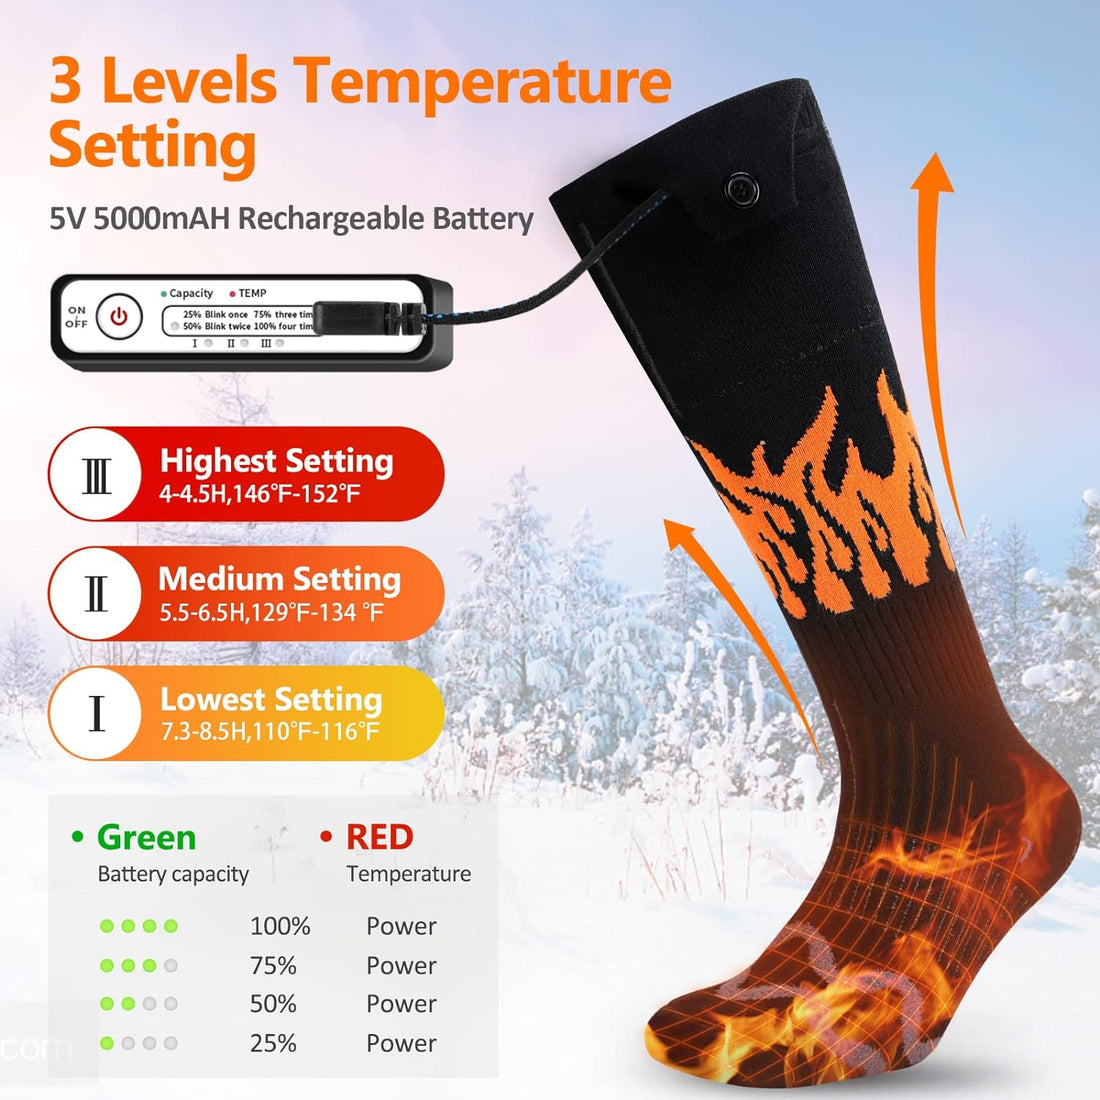 Heated Socks Rechargeable Electric Heated Socks for Men Women - 5V/5000 mAh Battery Powered Foot Warmer Stockings with APP Control for Winter Hunting Skiing Camping Hiking